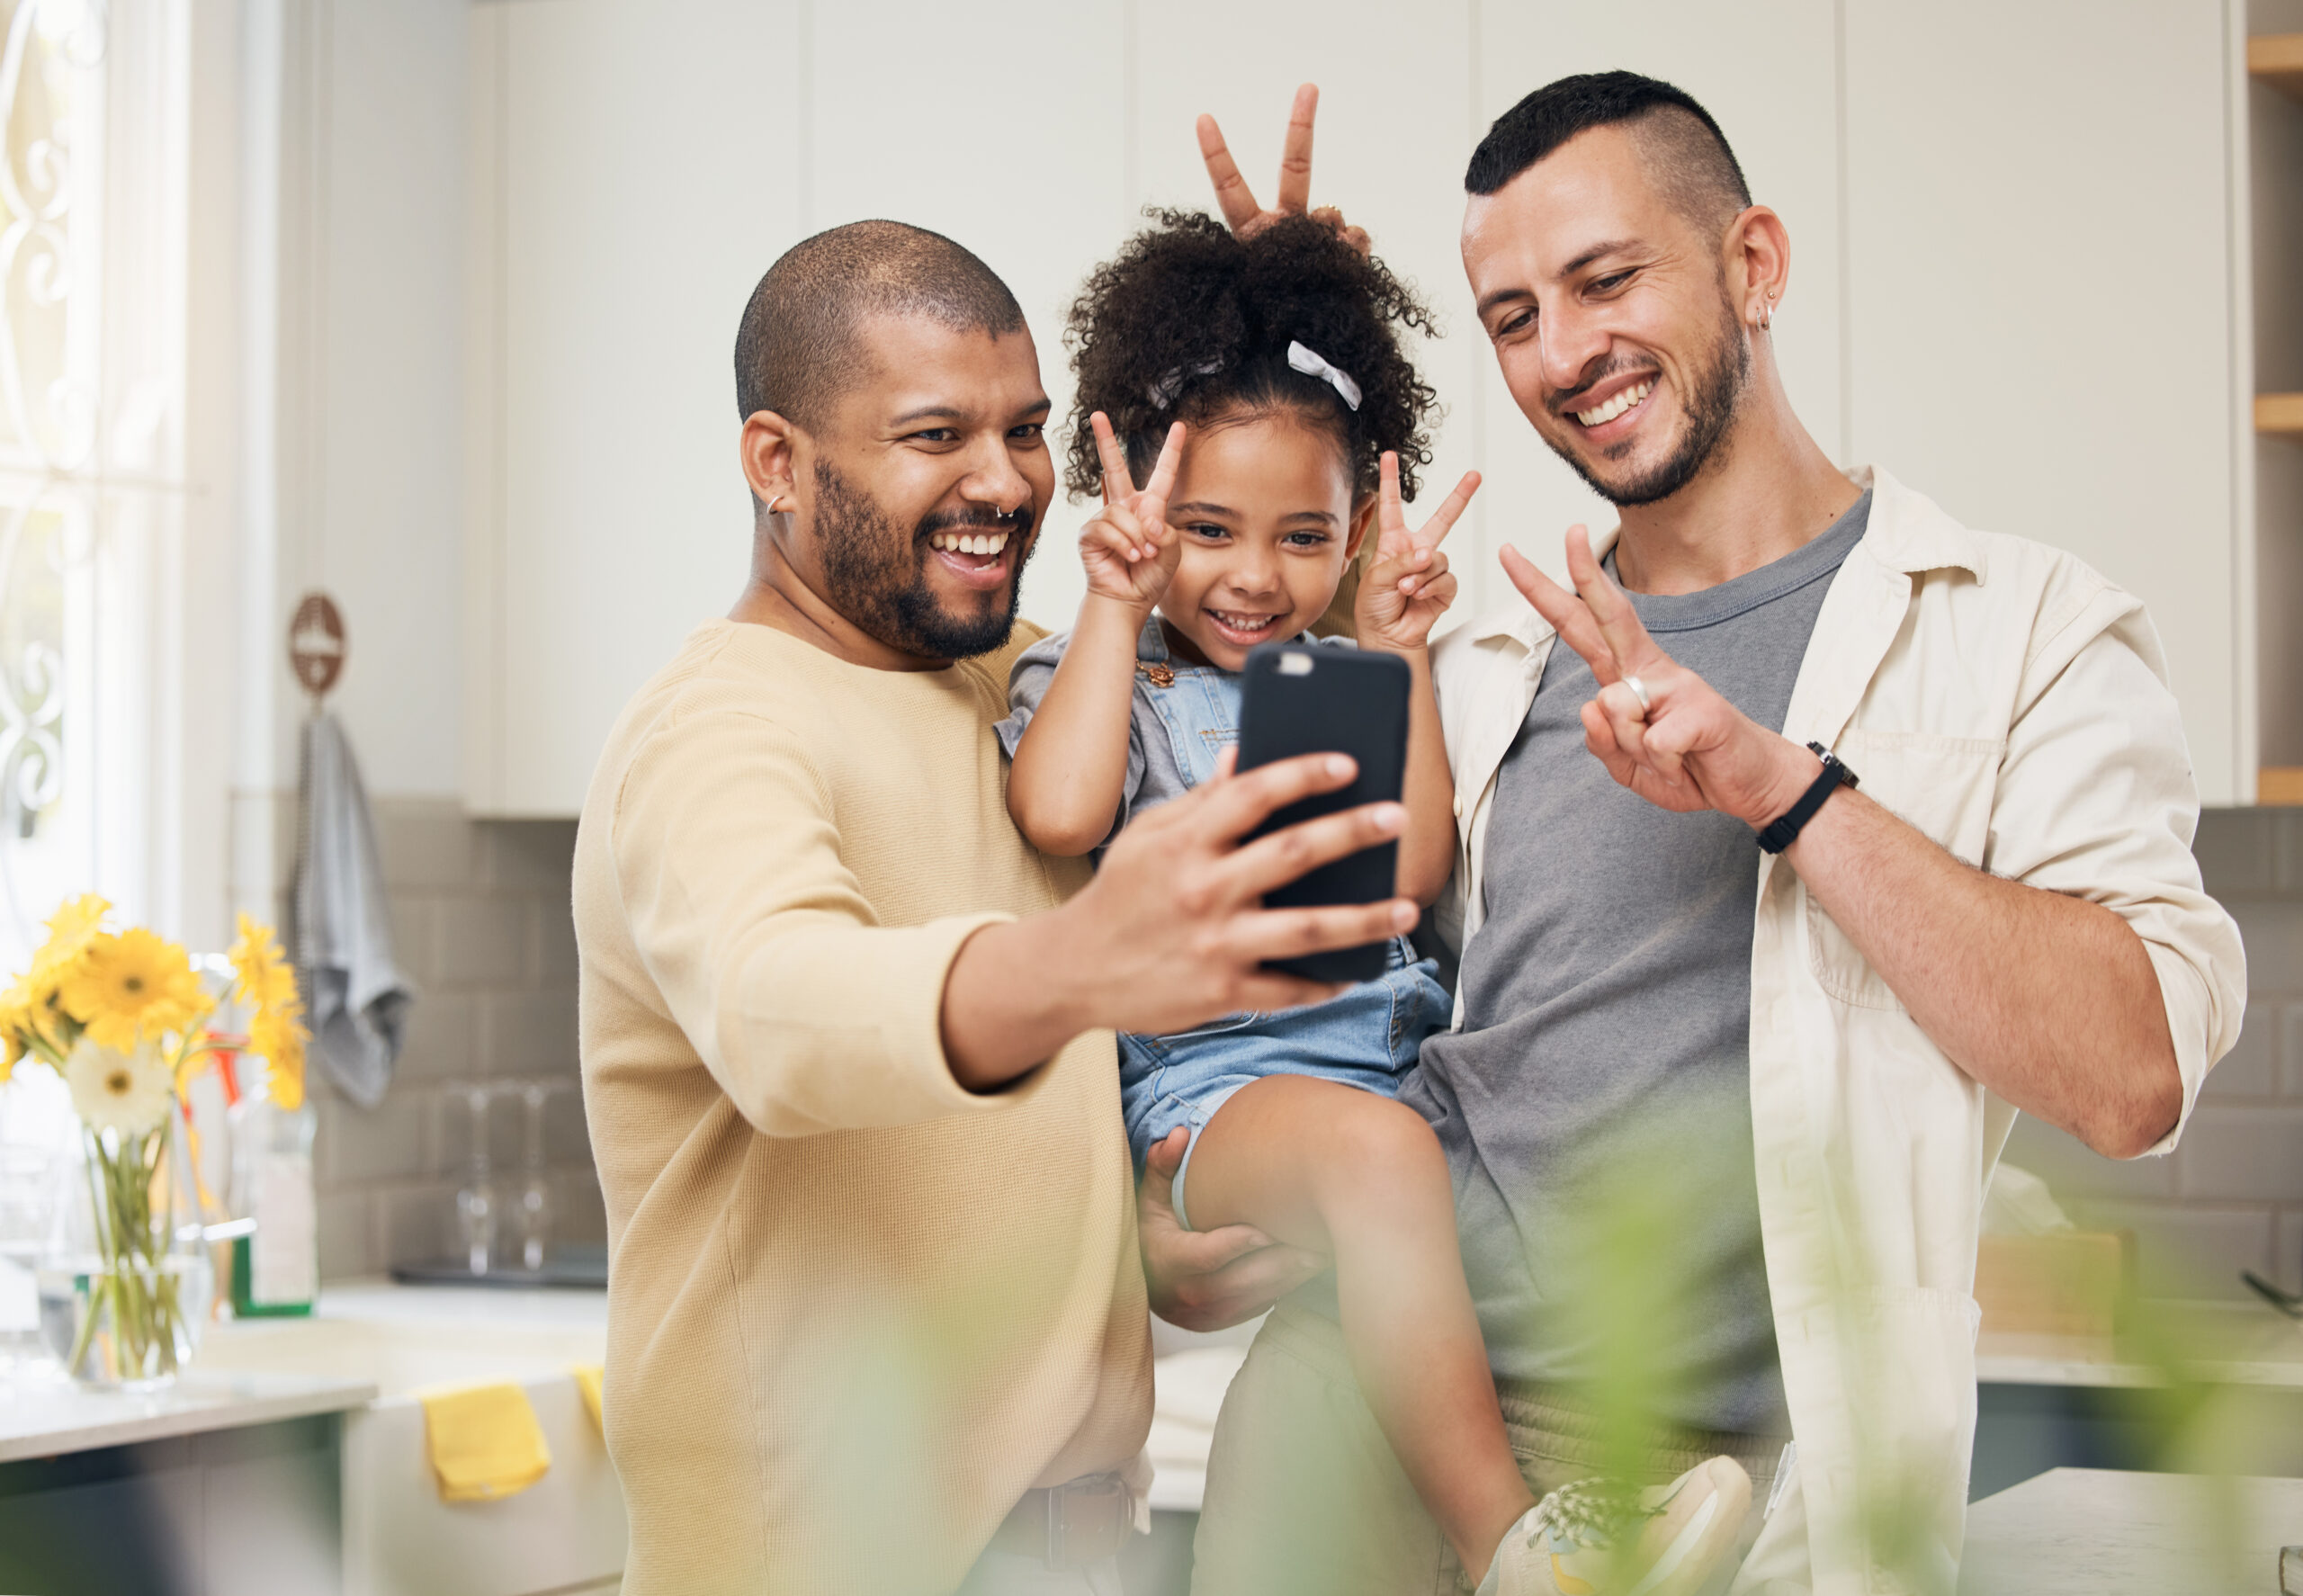 selfie, blended family and a happy girl with her gay parents in the kitchen together for a profile picture. adoption photograph, smile or love and a playful daughter with her lgbt father in the home